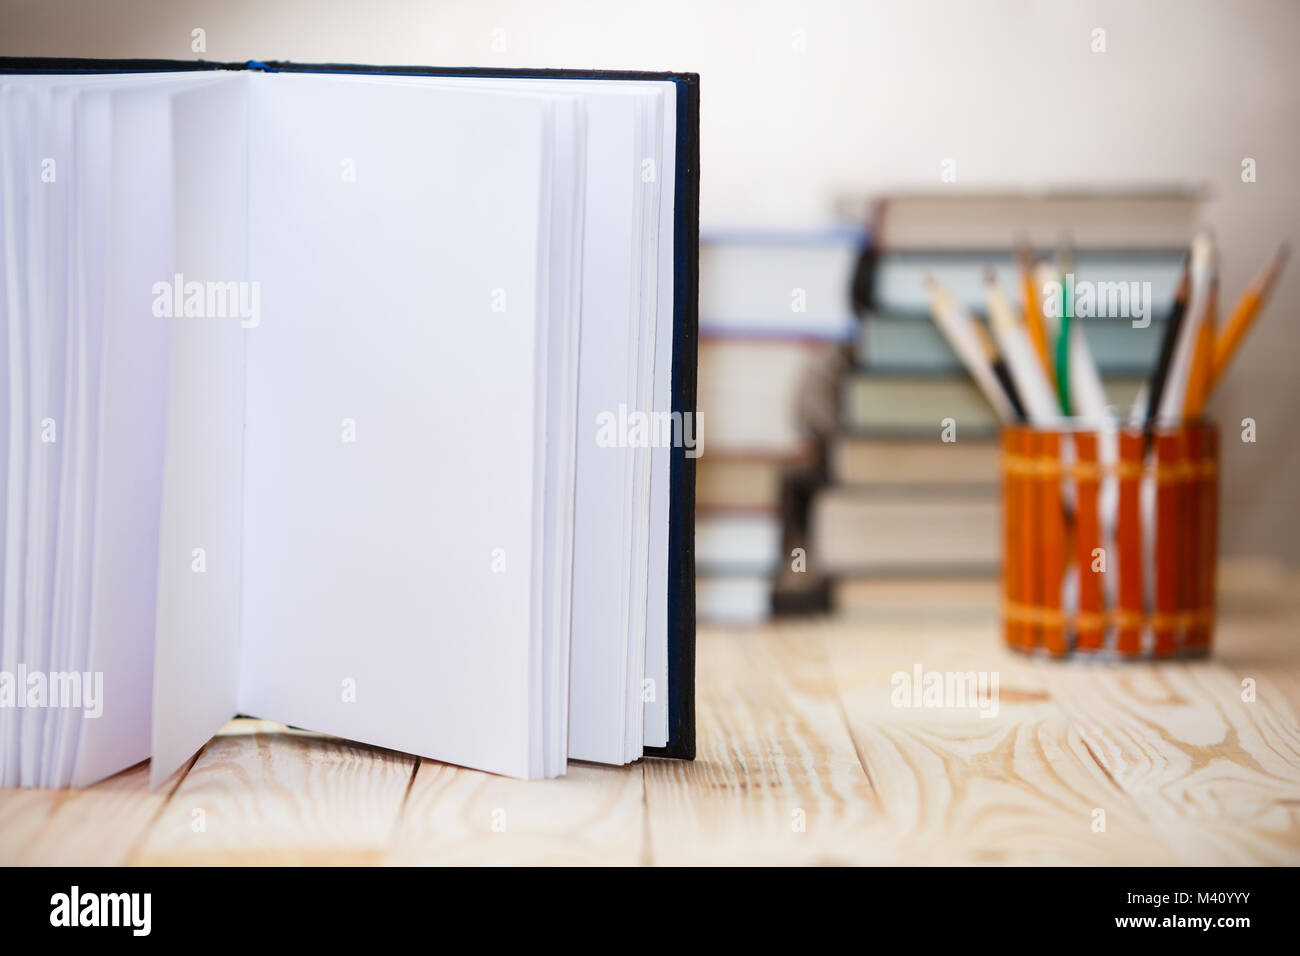 Open book on wood desk with blurred focus for background. Stock Photo